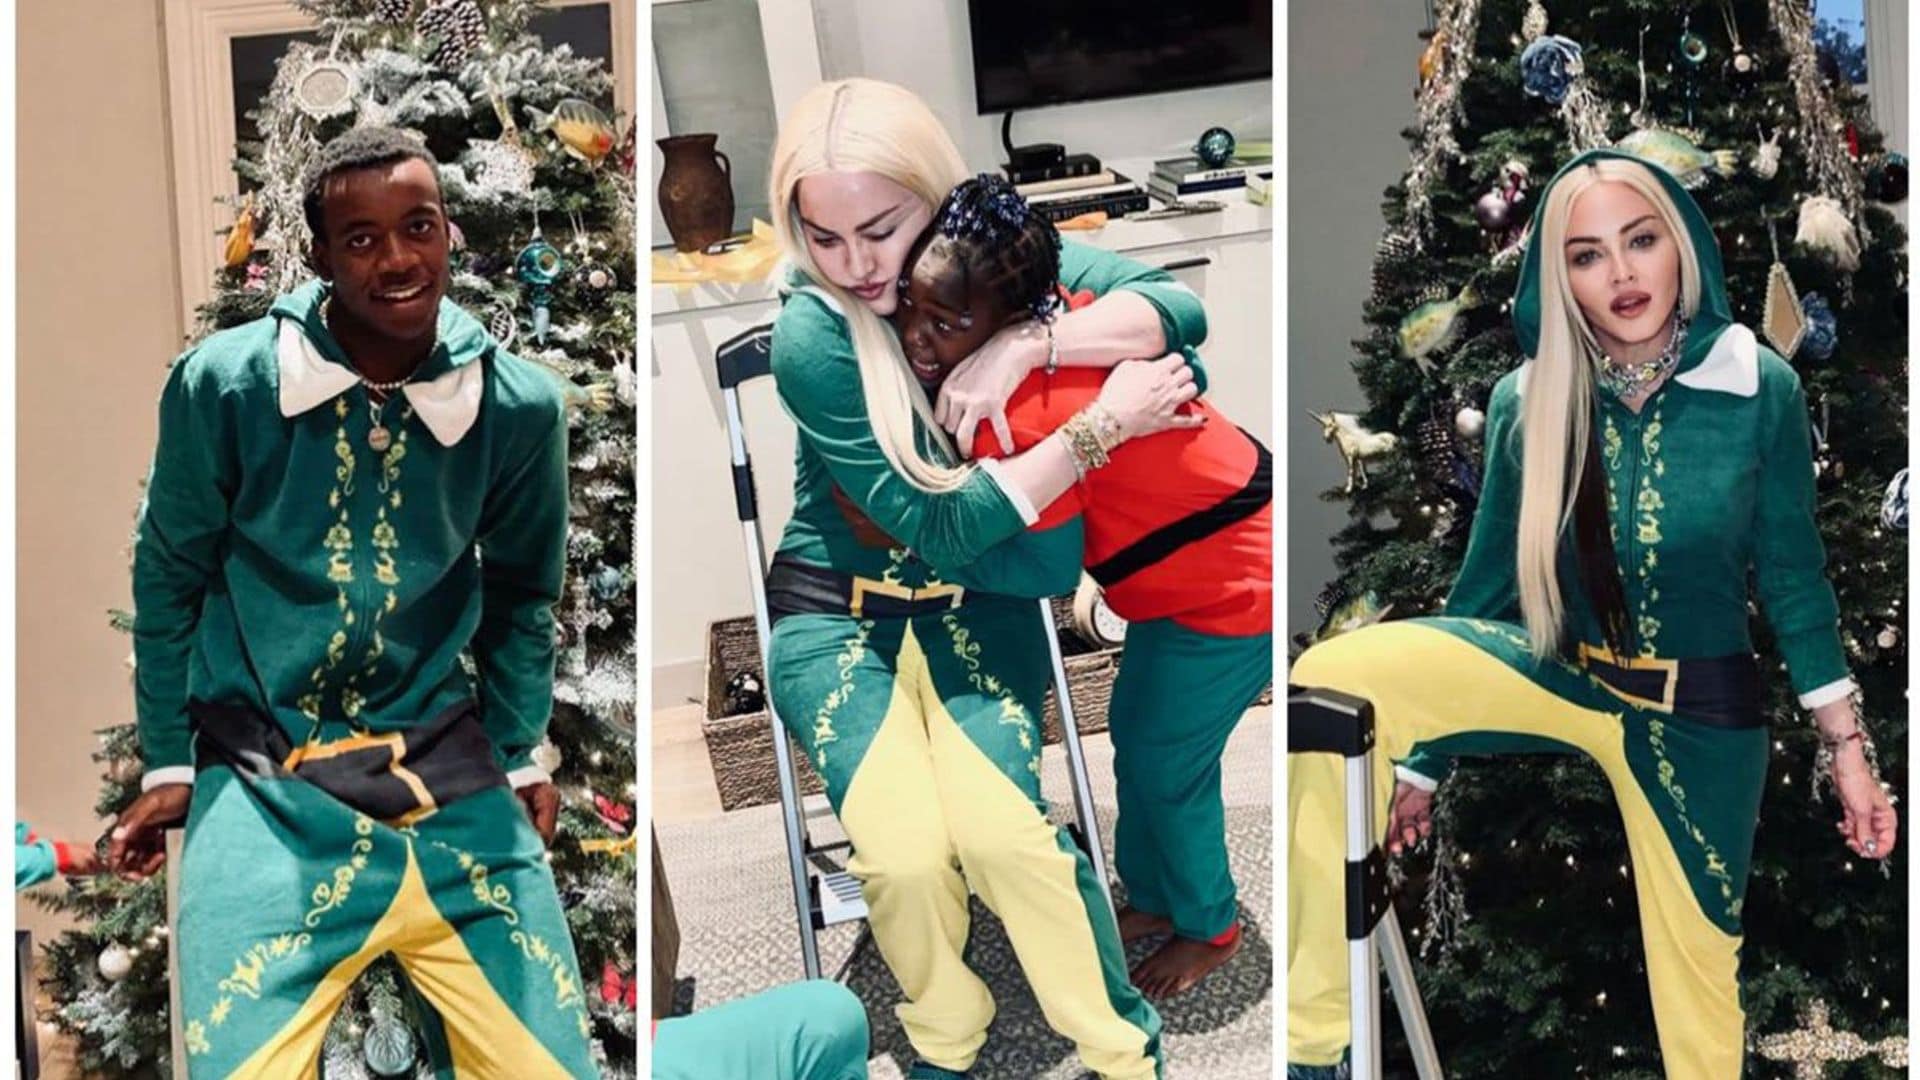 Madonna, her boyfriend, and some of her kids gather around the Christmas tree in festive pajamas